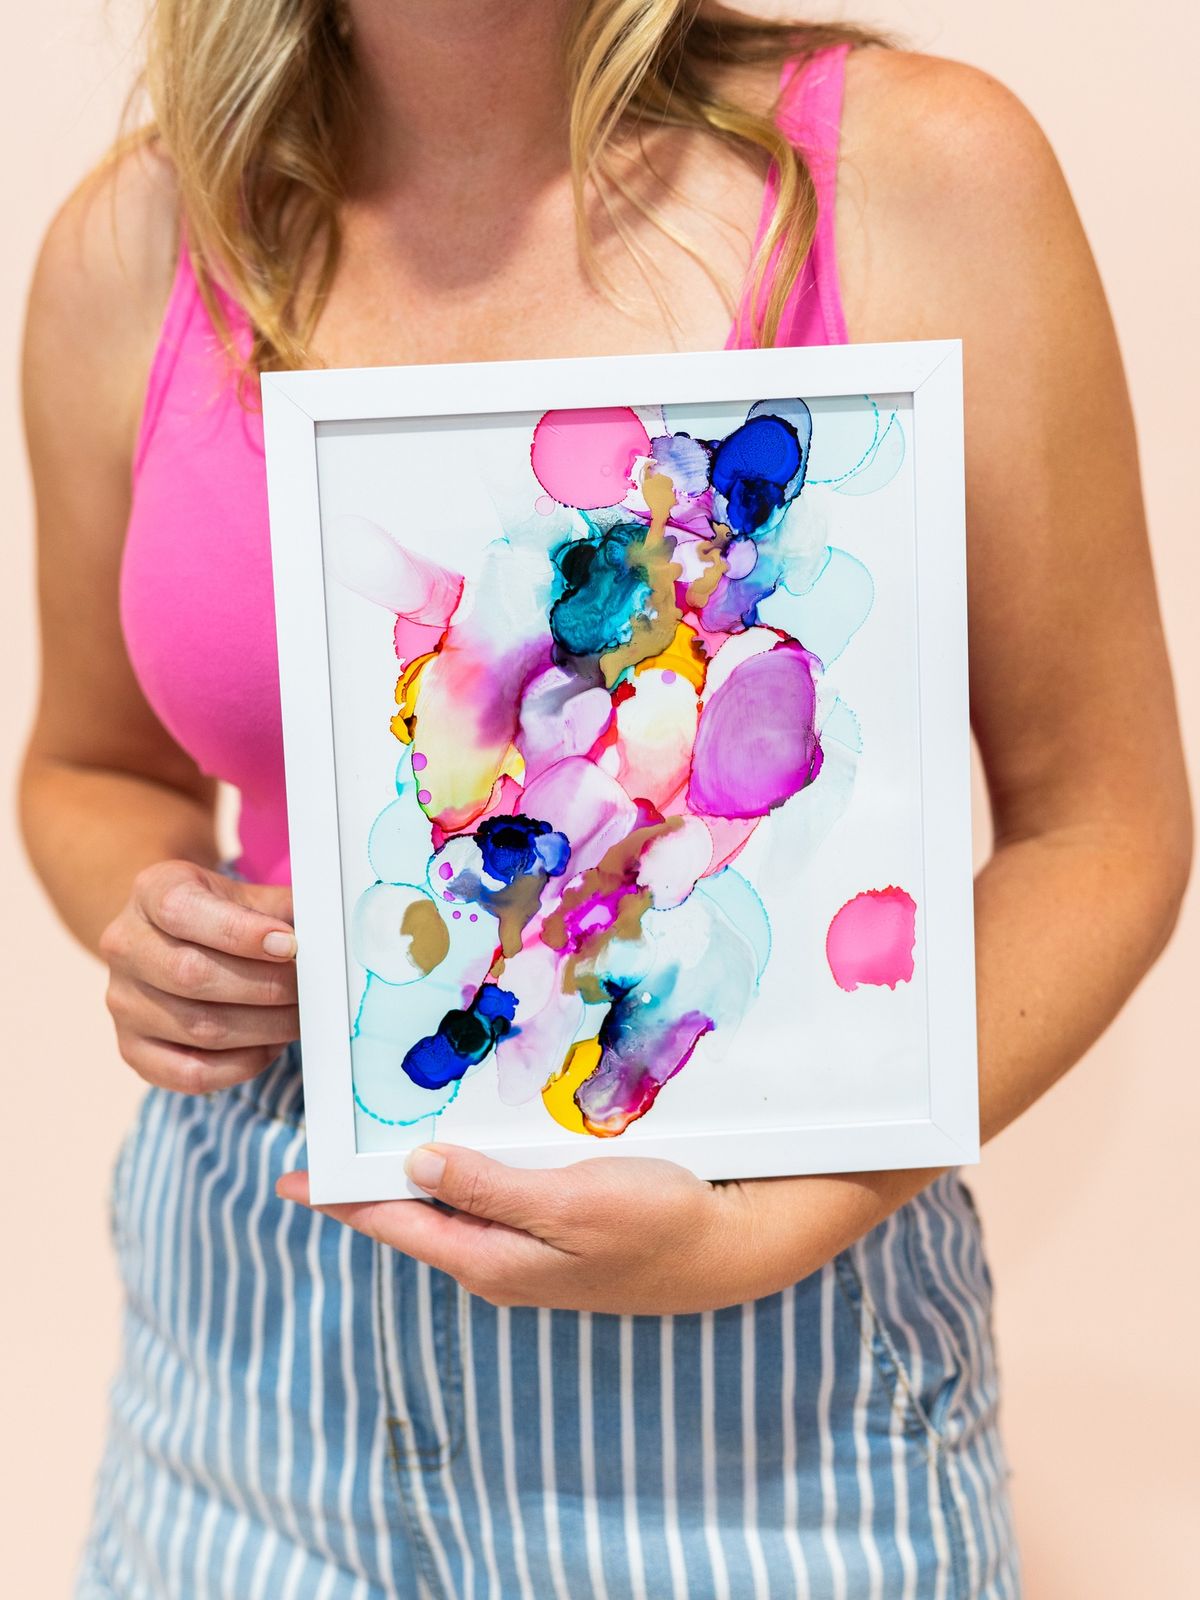 Alcohol Ink Workshop with Amy Thoennes